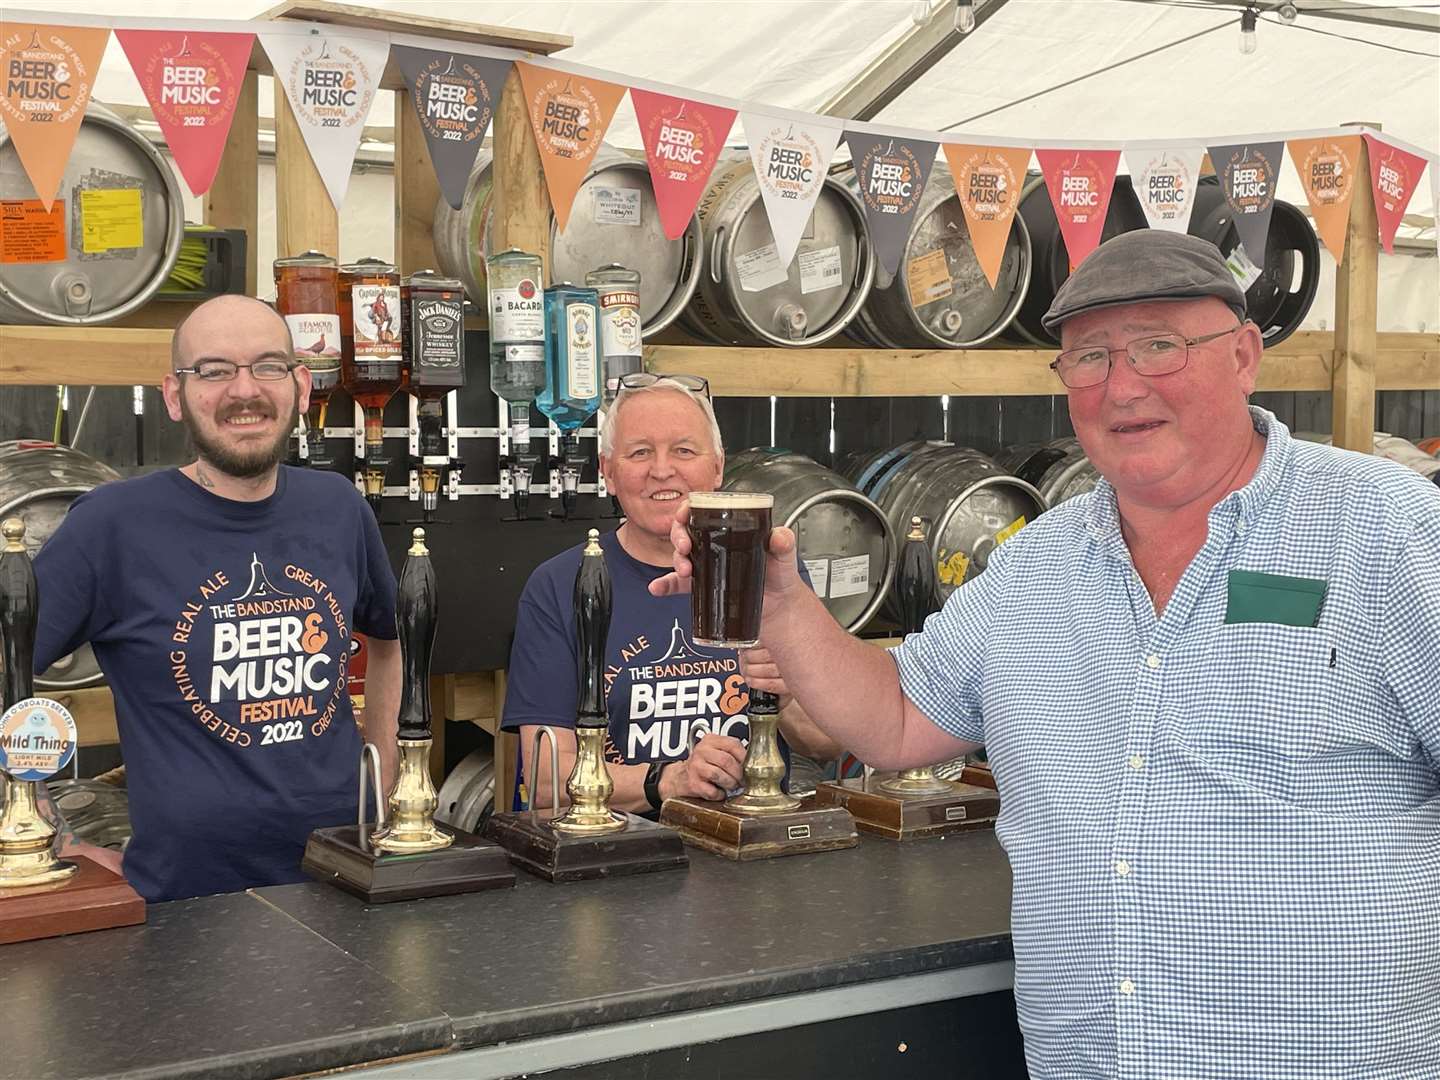 Cheers from Martin, a visitor from Luton who enjoyed the first pint at the festival served by Ali Deans and Andrew Gardiner.